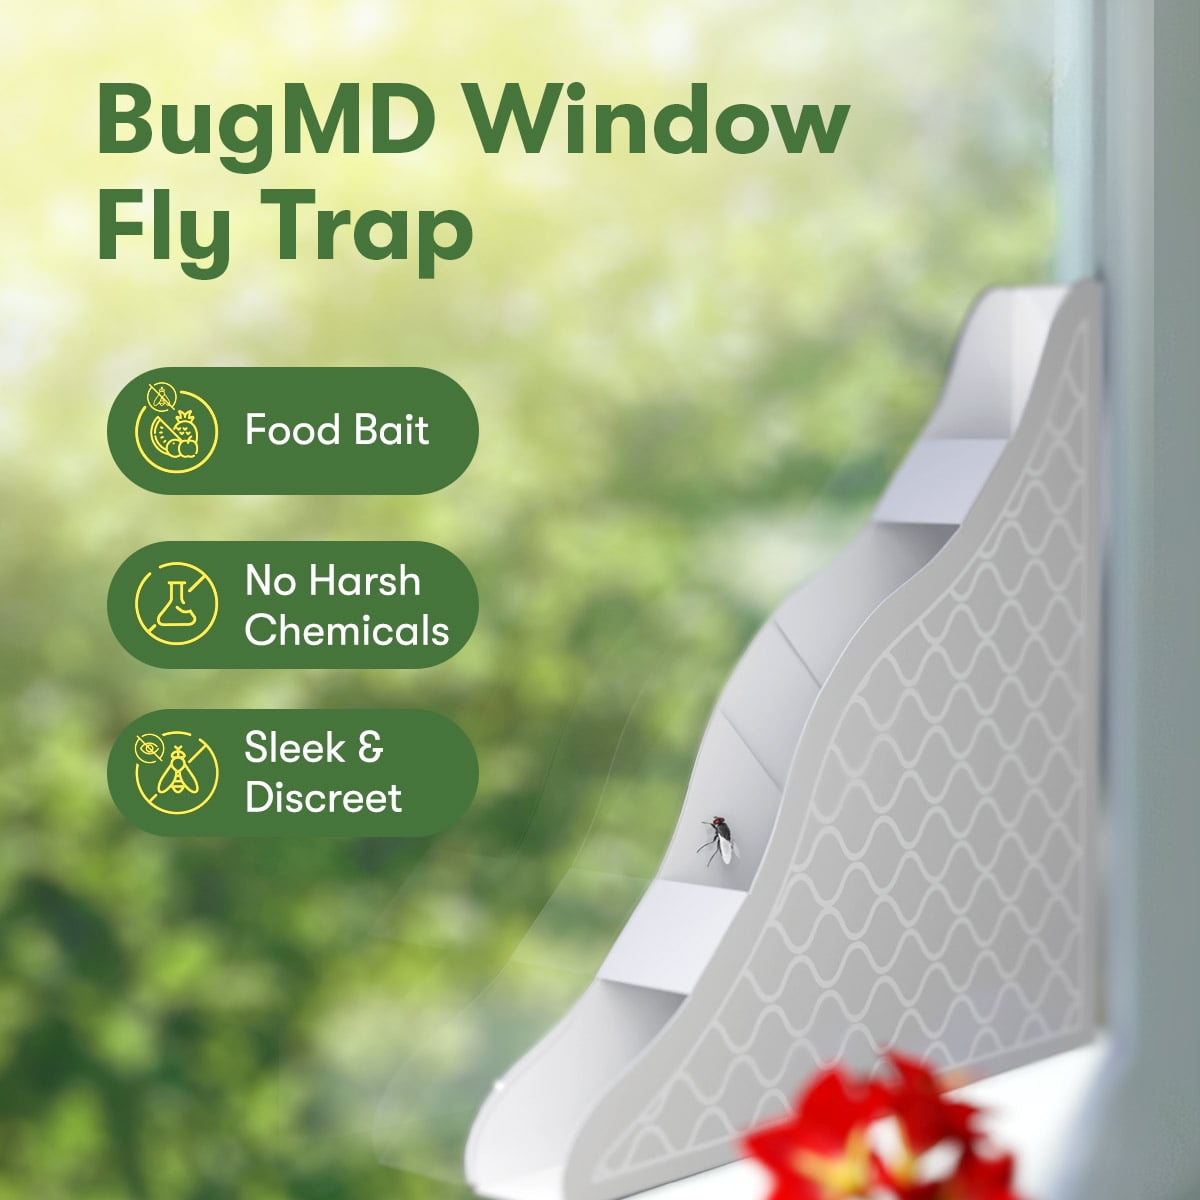 BugMD Barfly Window Replacement Traps (6 Pack) - Window Fly Paper, Fly Trap Indoor, Window Fly Strips, Window Fly Tape, Indoor Fly Trap for Home, Fly